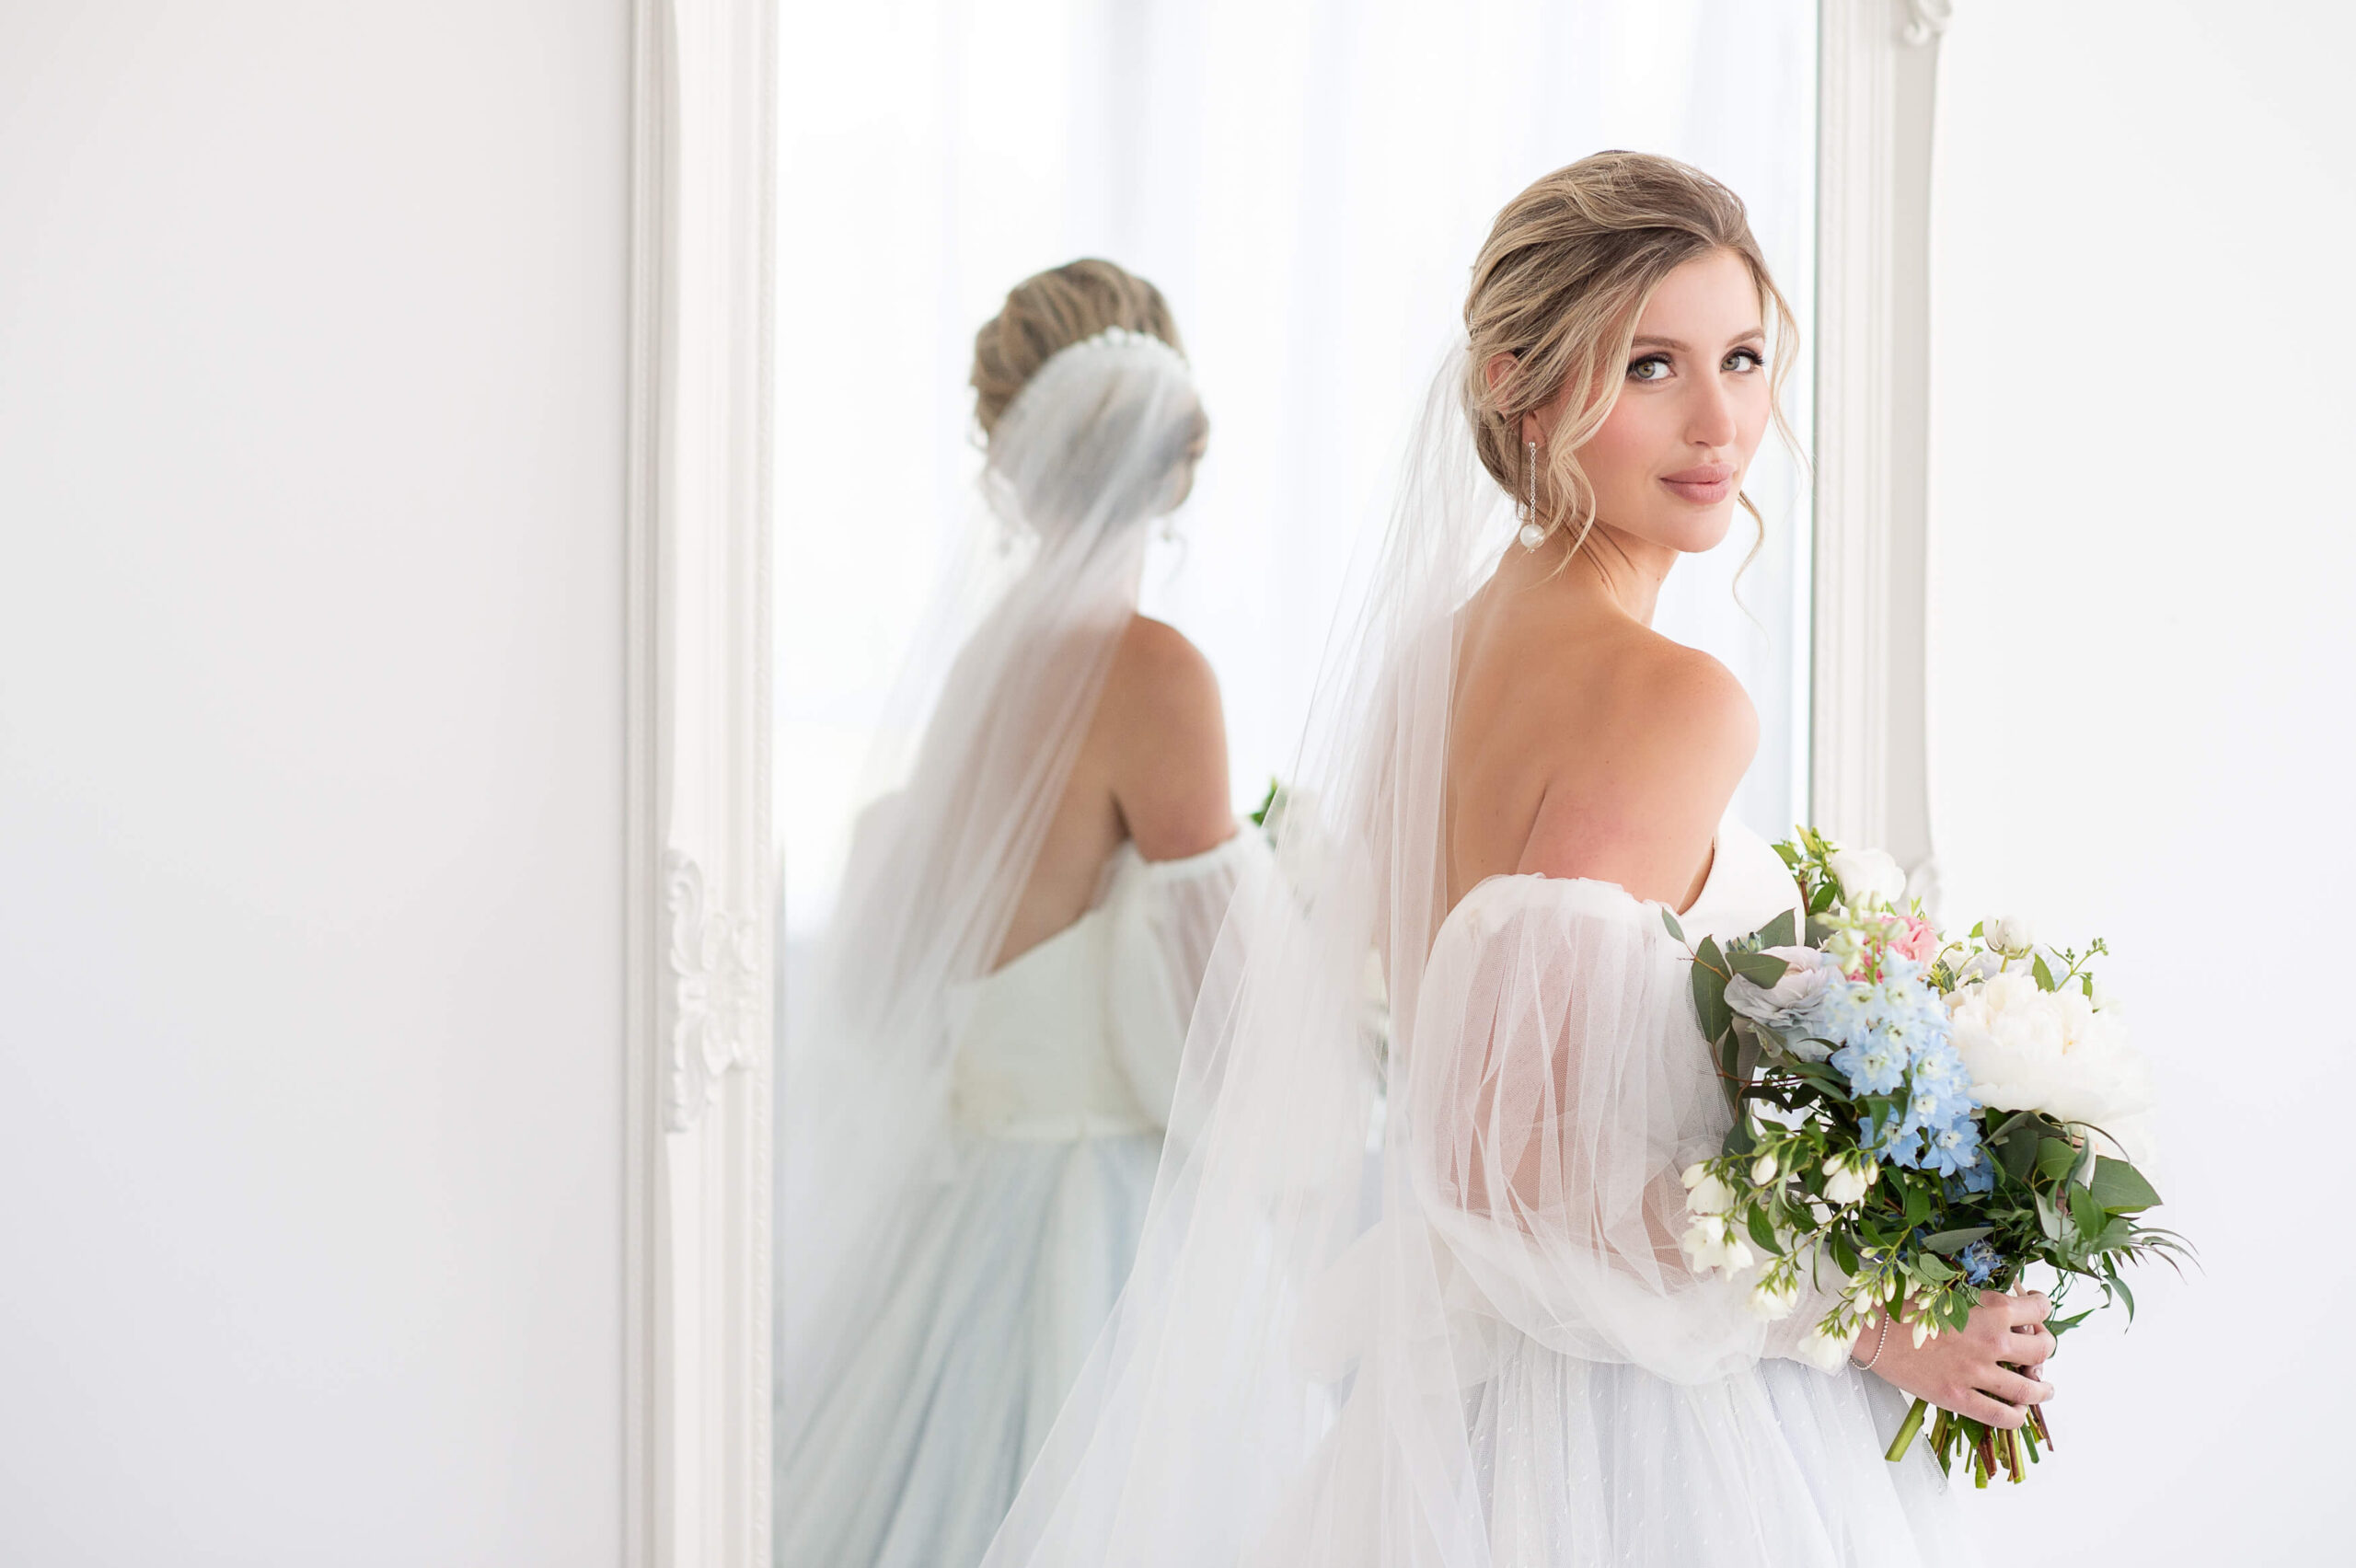 a bride wearing a veil and holding a bouquet of pink, white and blue flowers looking back over her shoulder with a reflection in the mirror. The happiness on the bride's face shows how to choose a wedding photographer in Ottawa